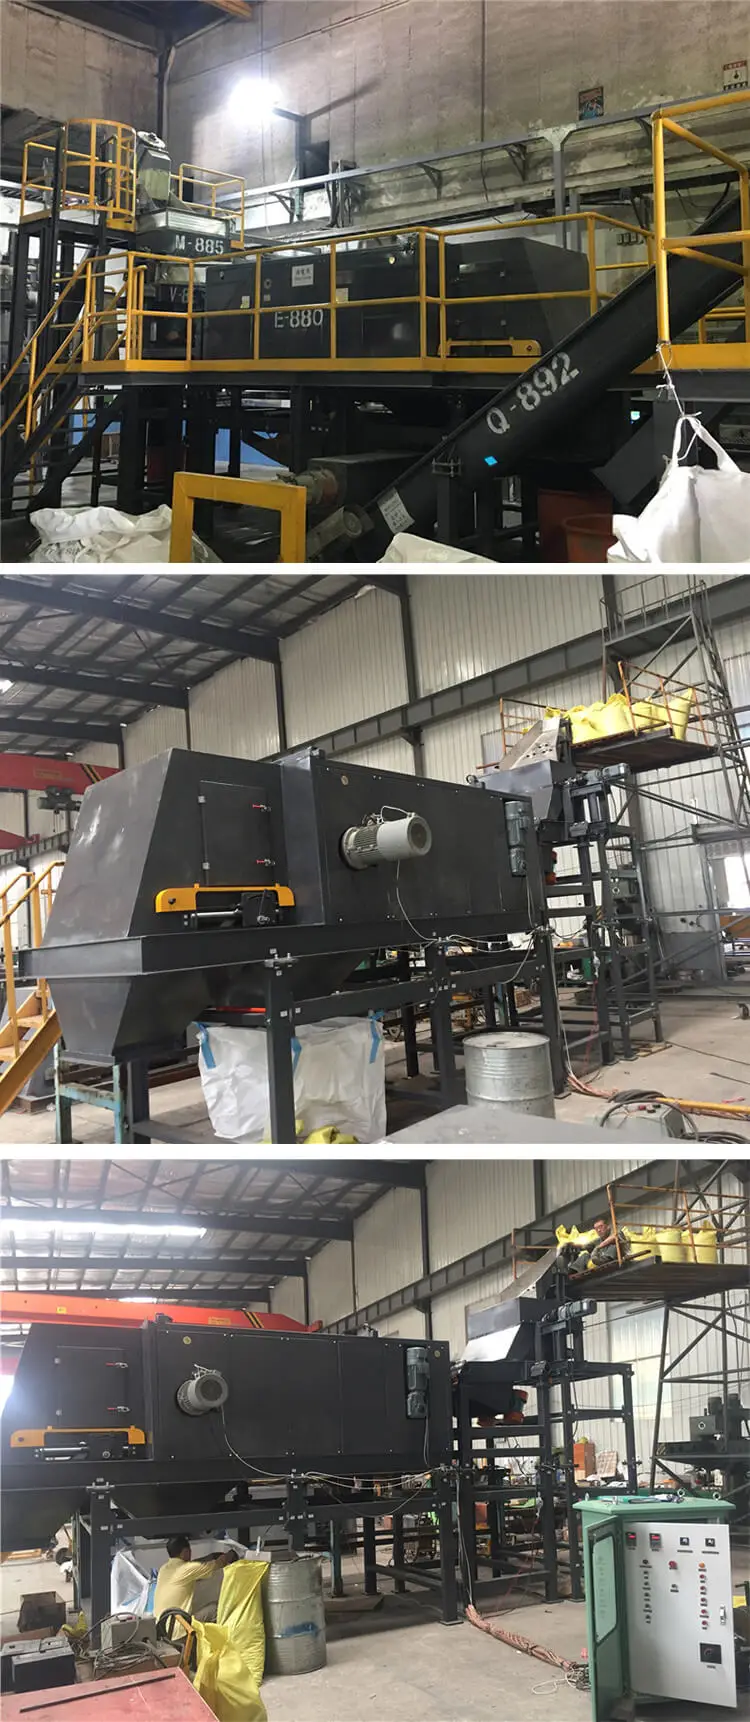 Waste recycling machine for aluminum, eddy current separator for pet bottle or plastic flakes and medical glasses scraps